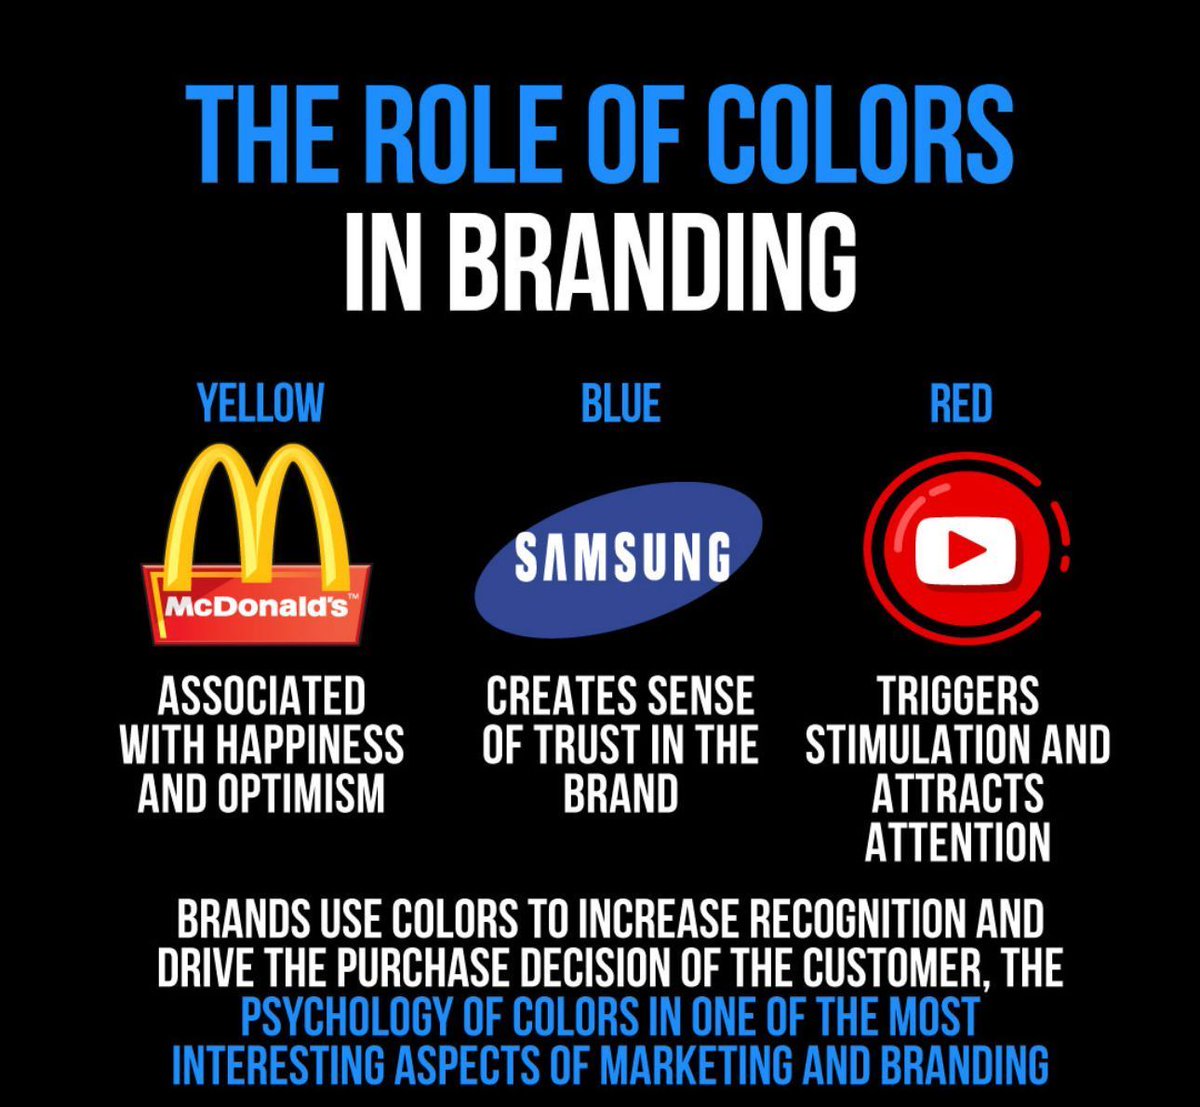 Color is more than just a hue; it's a branding powerhouse! 🎨 Embrace the psychology of colors to evoke emotions and shape perceptions. From trusty blues to fiery reds, each shade tells a unique story about your brand. #ColorPsychology #BrandIdentity 
#ColorPsychology #Brand